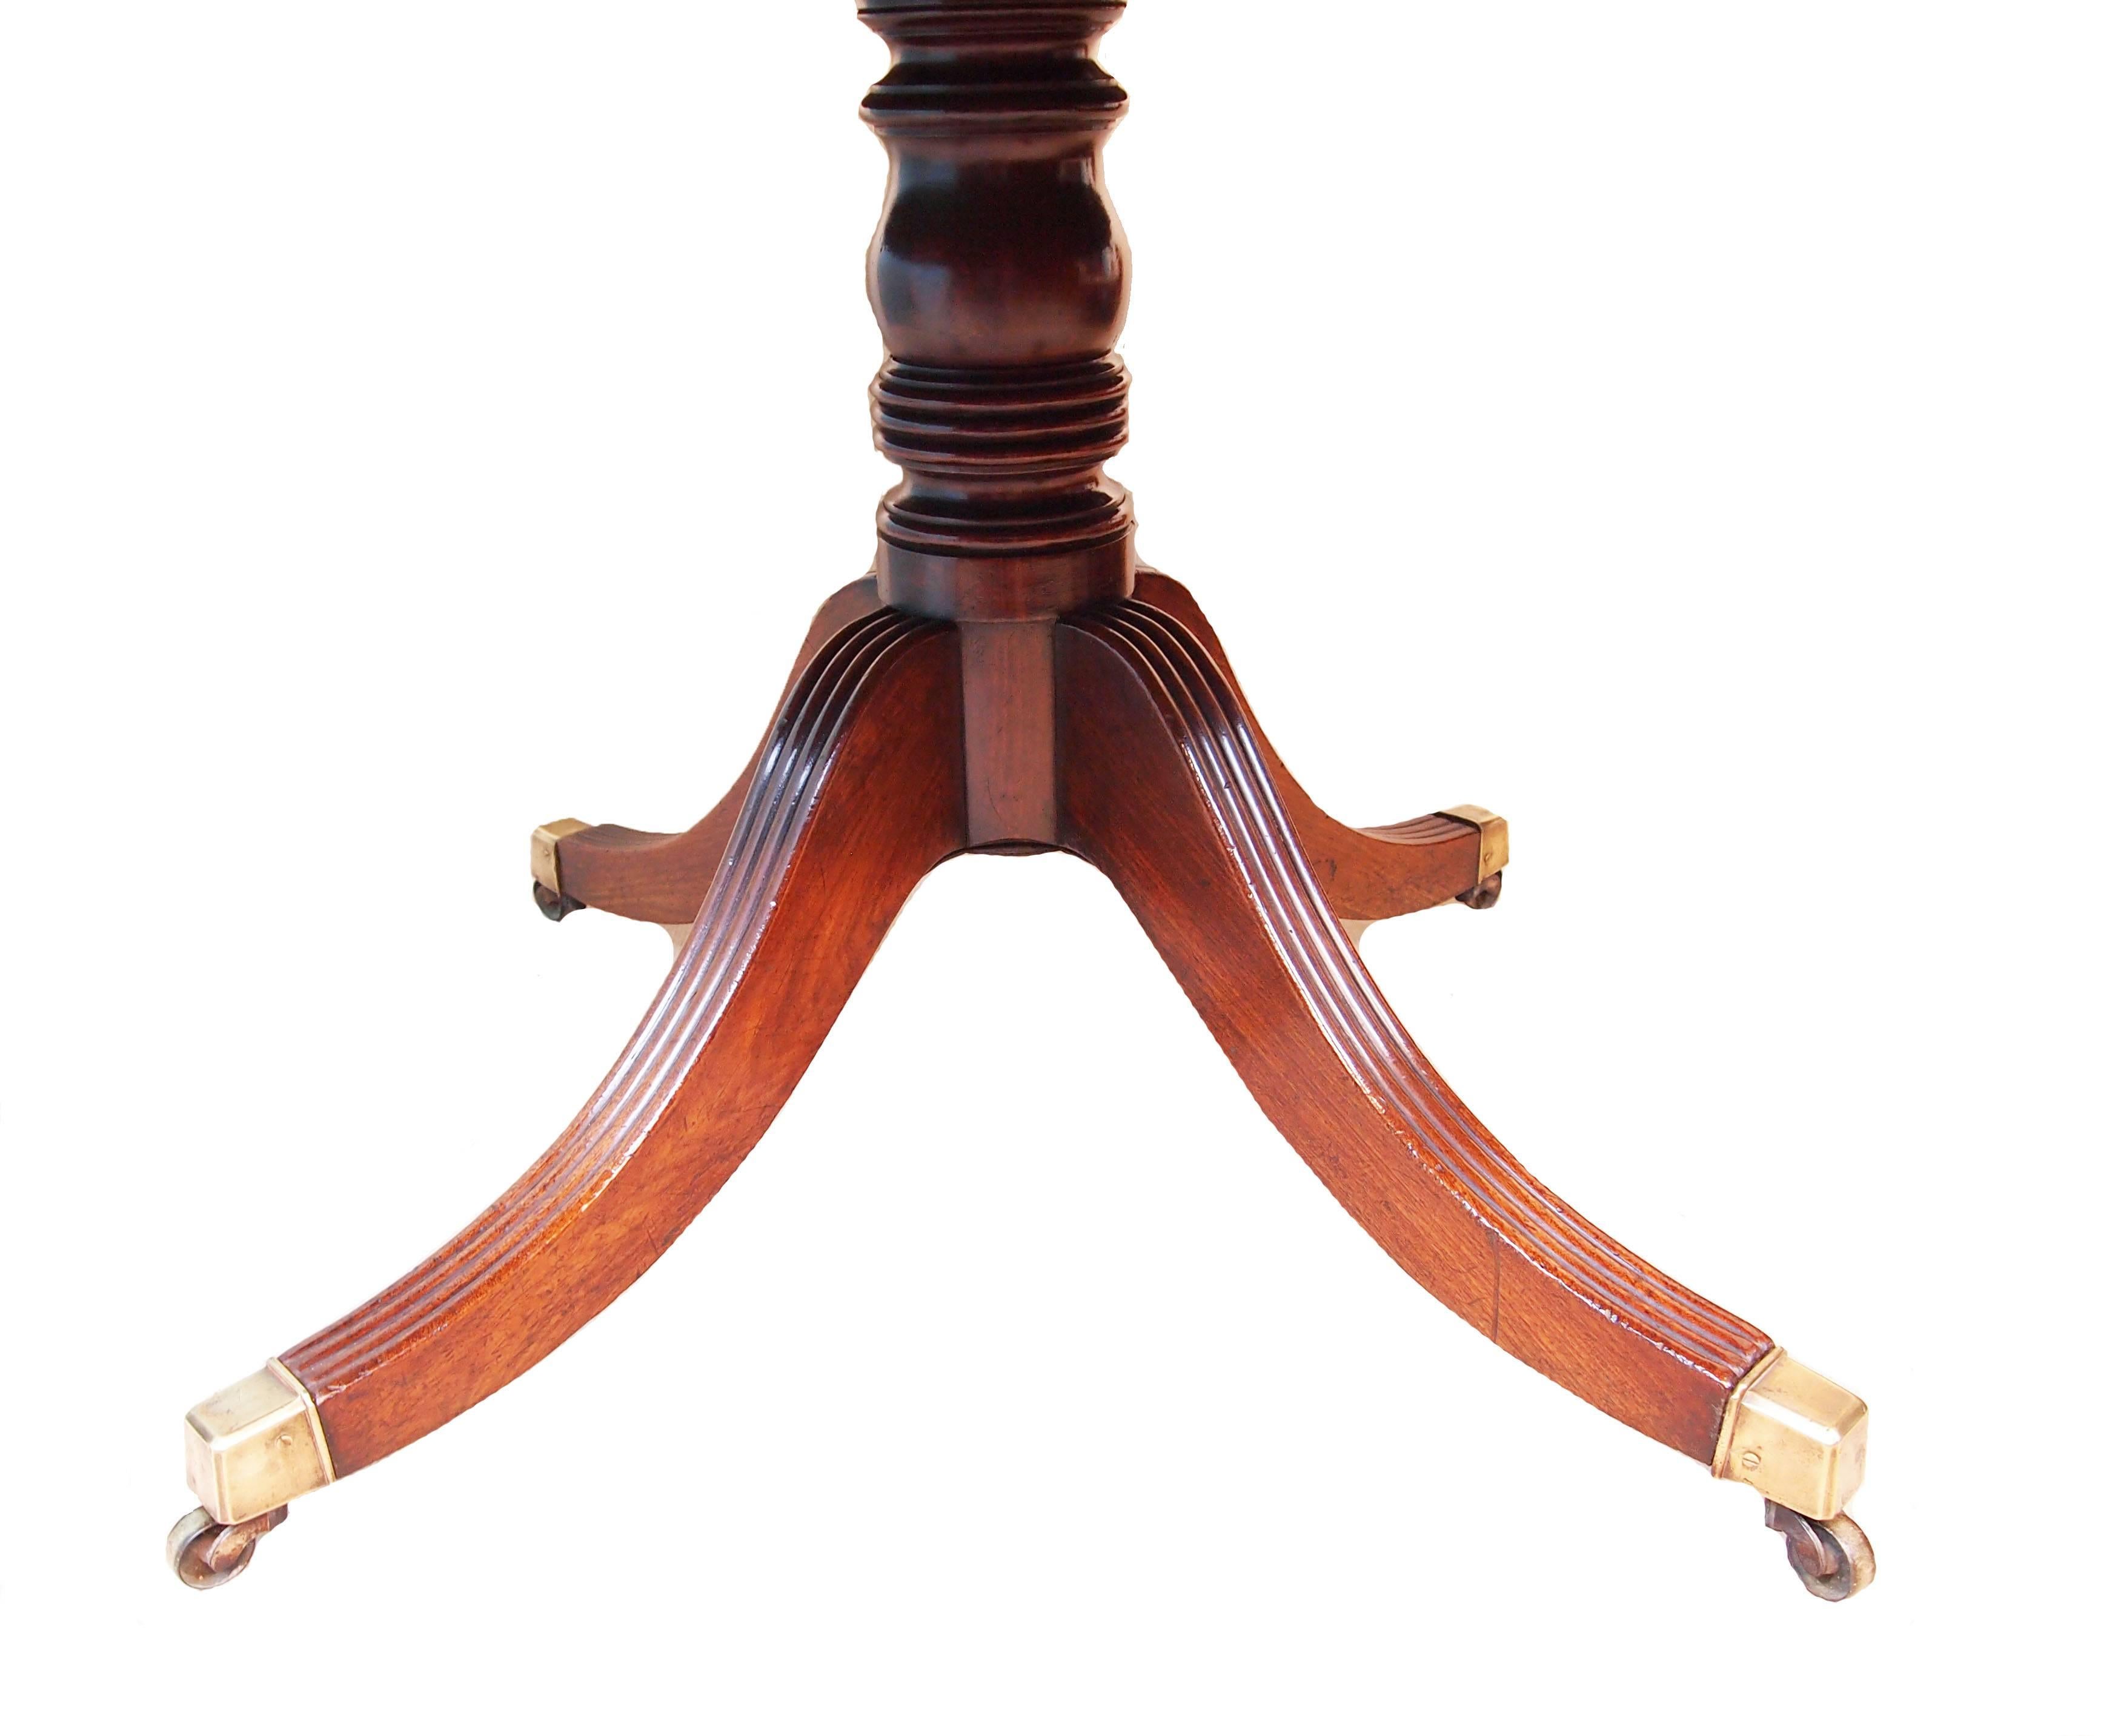 A Very Good Quality Early 19th Century George III
Period Mahogany Drum Table Having Well Figured Circular
Rotating Top Raised On Elegant Turned Column And Four Splayed
Legs Terminating On Original Brass Castors

(Often referred to as rent tables due